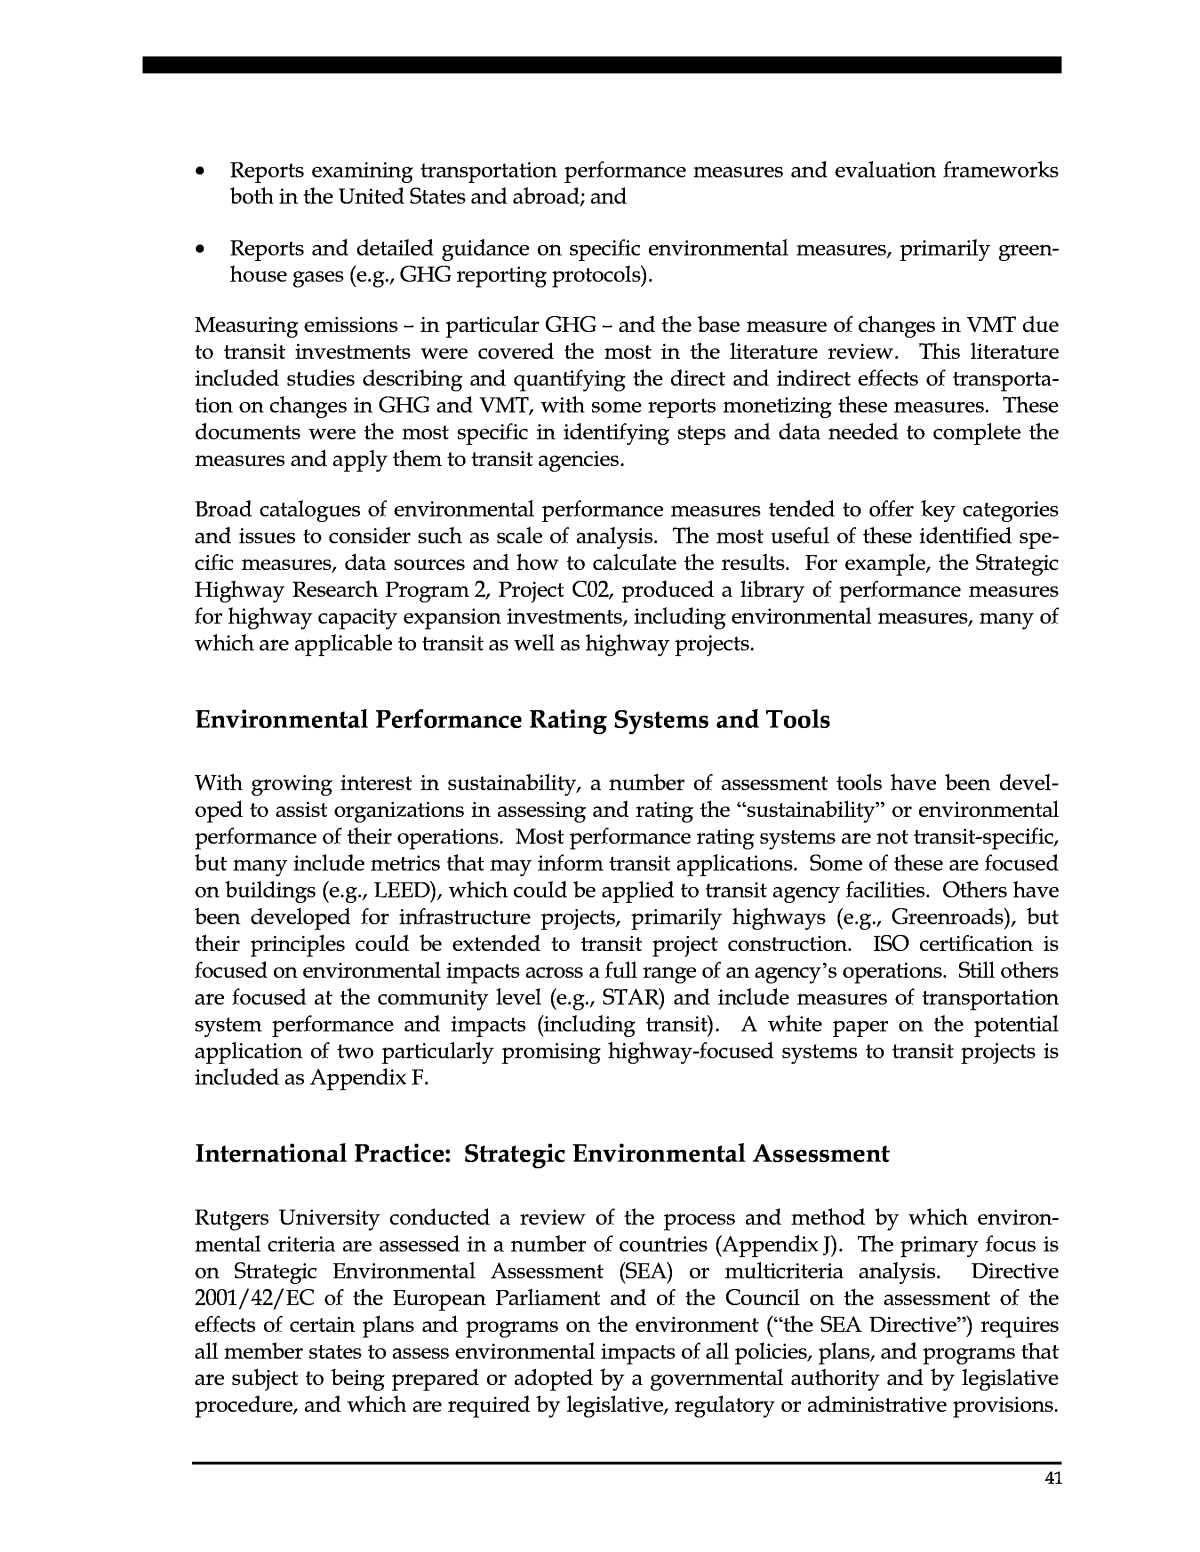  Background Research Findings | Assessing and Comparing Environmental  Performance of Major Transit Investments |The National Academies Press